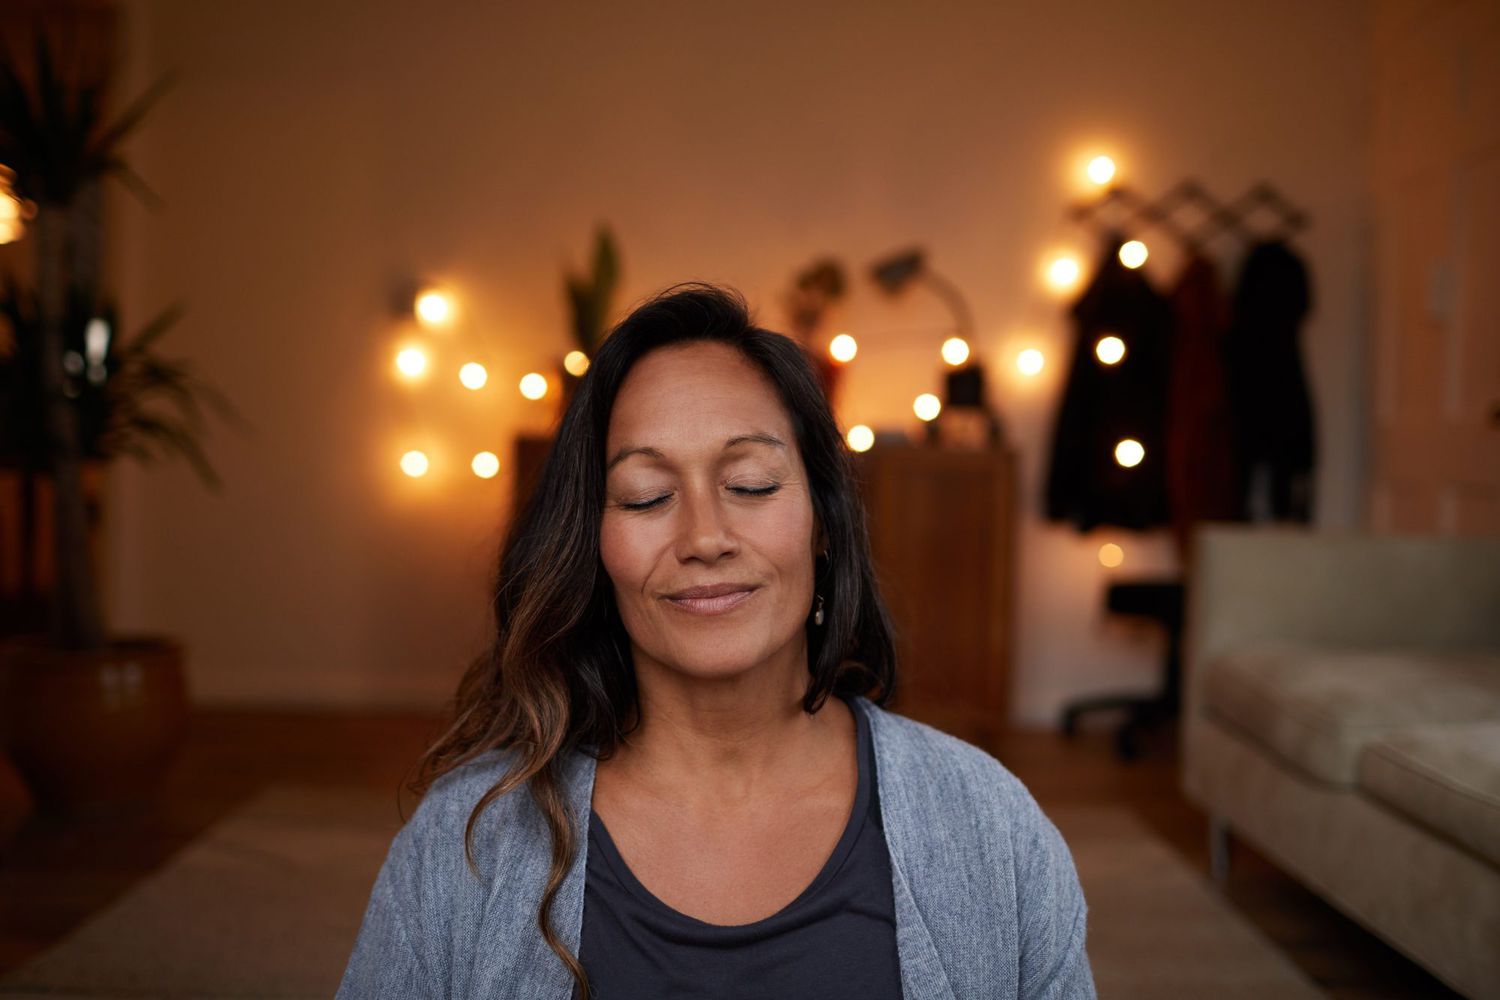 woman meditating at night in home